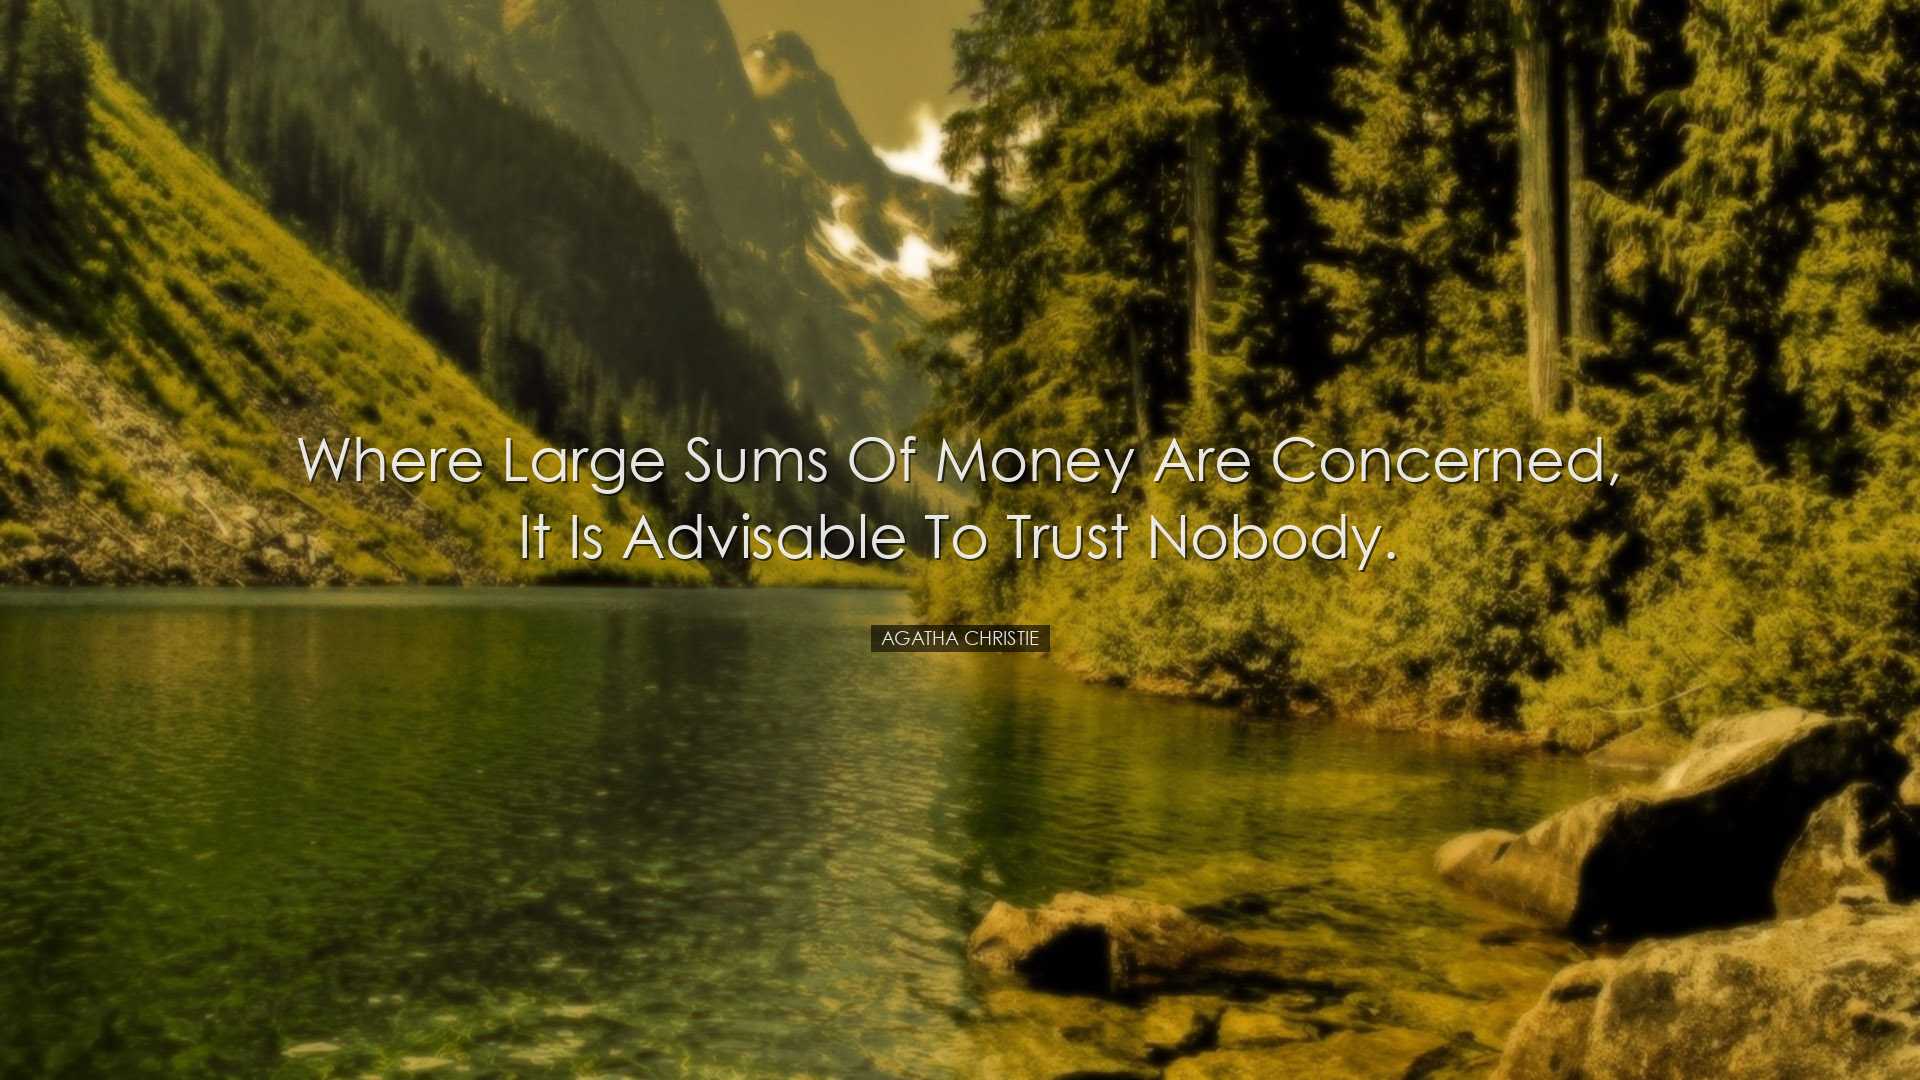 Where large sums of money are concerned, it is advisable to trust